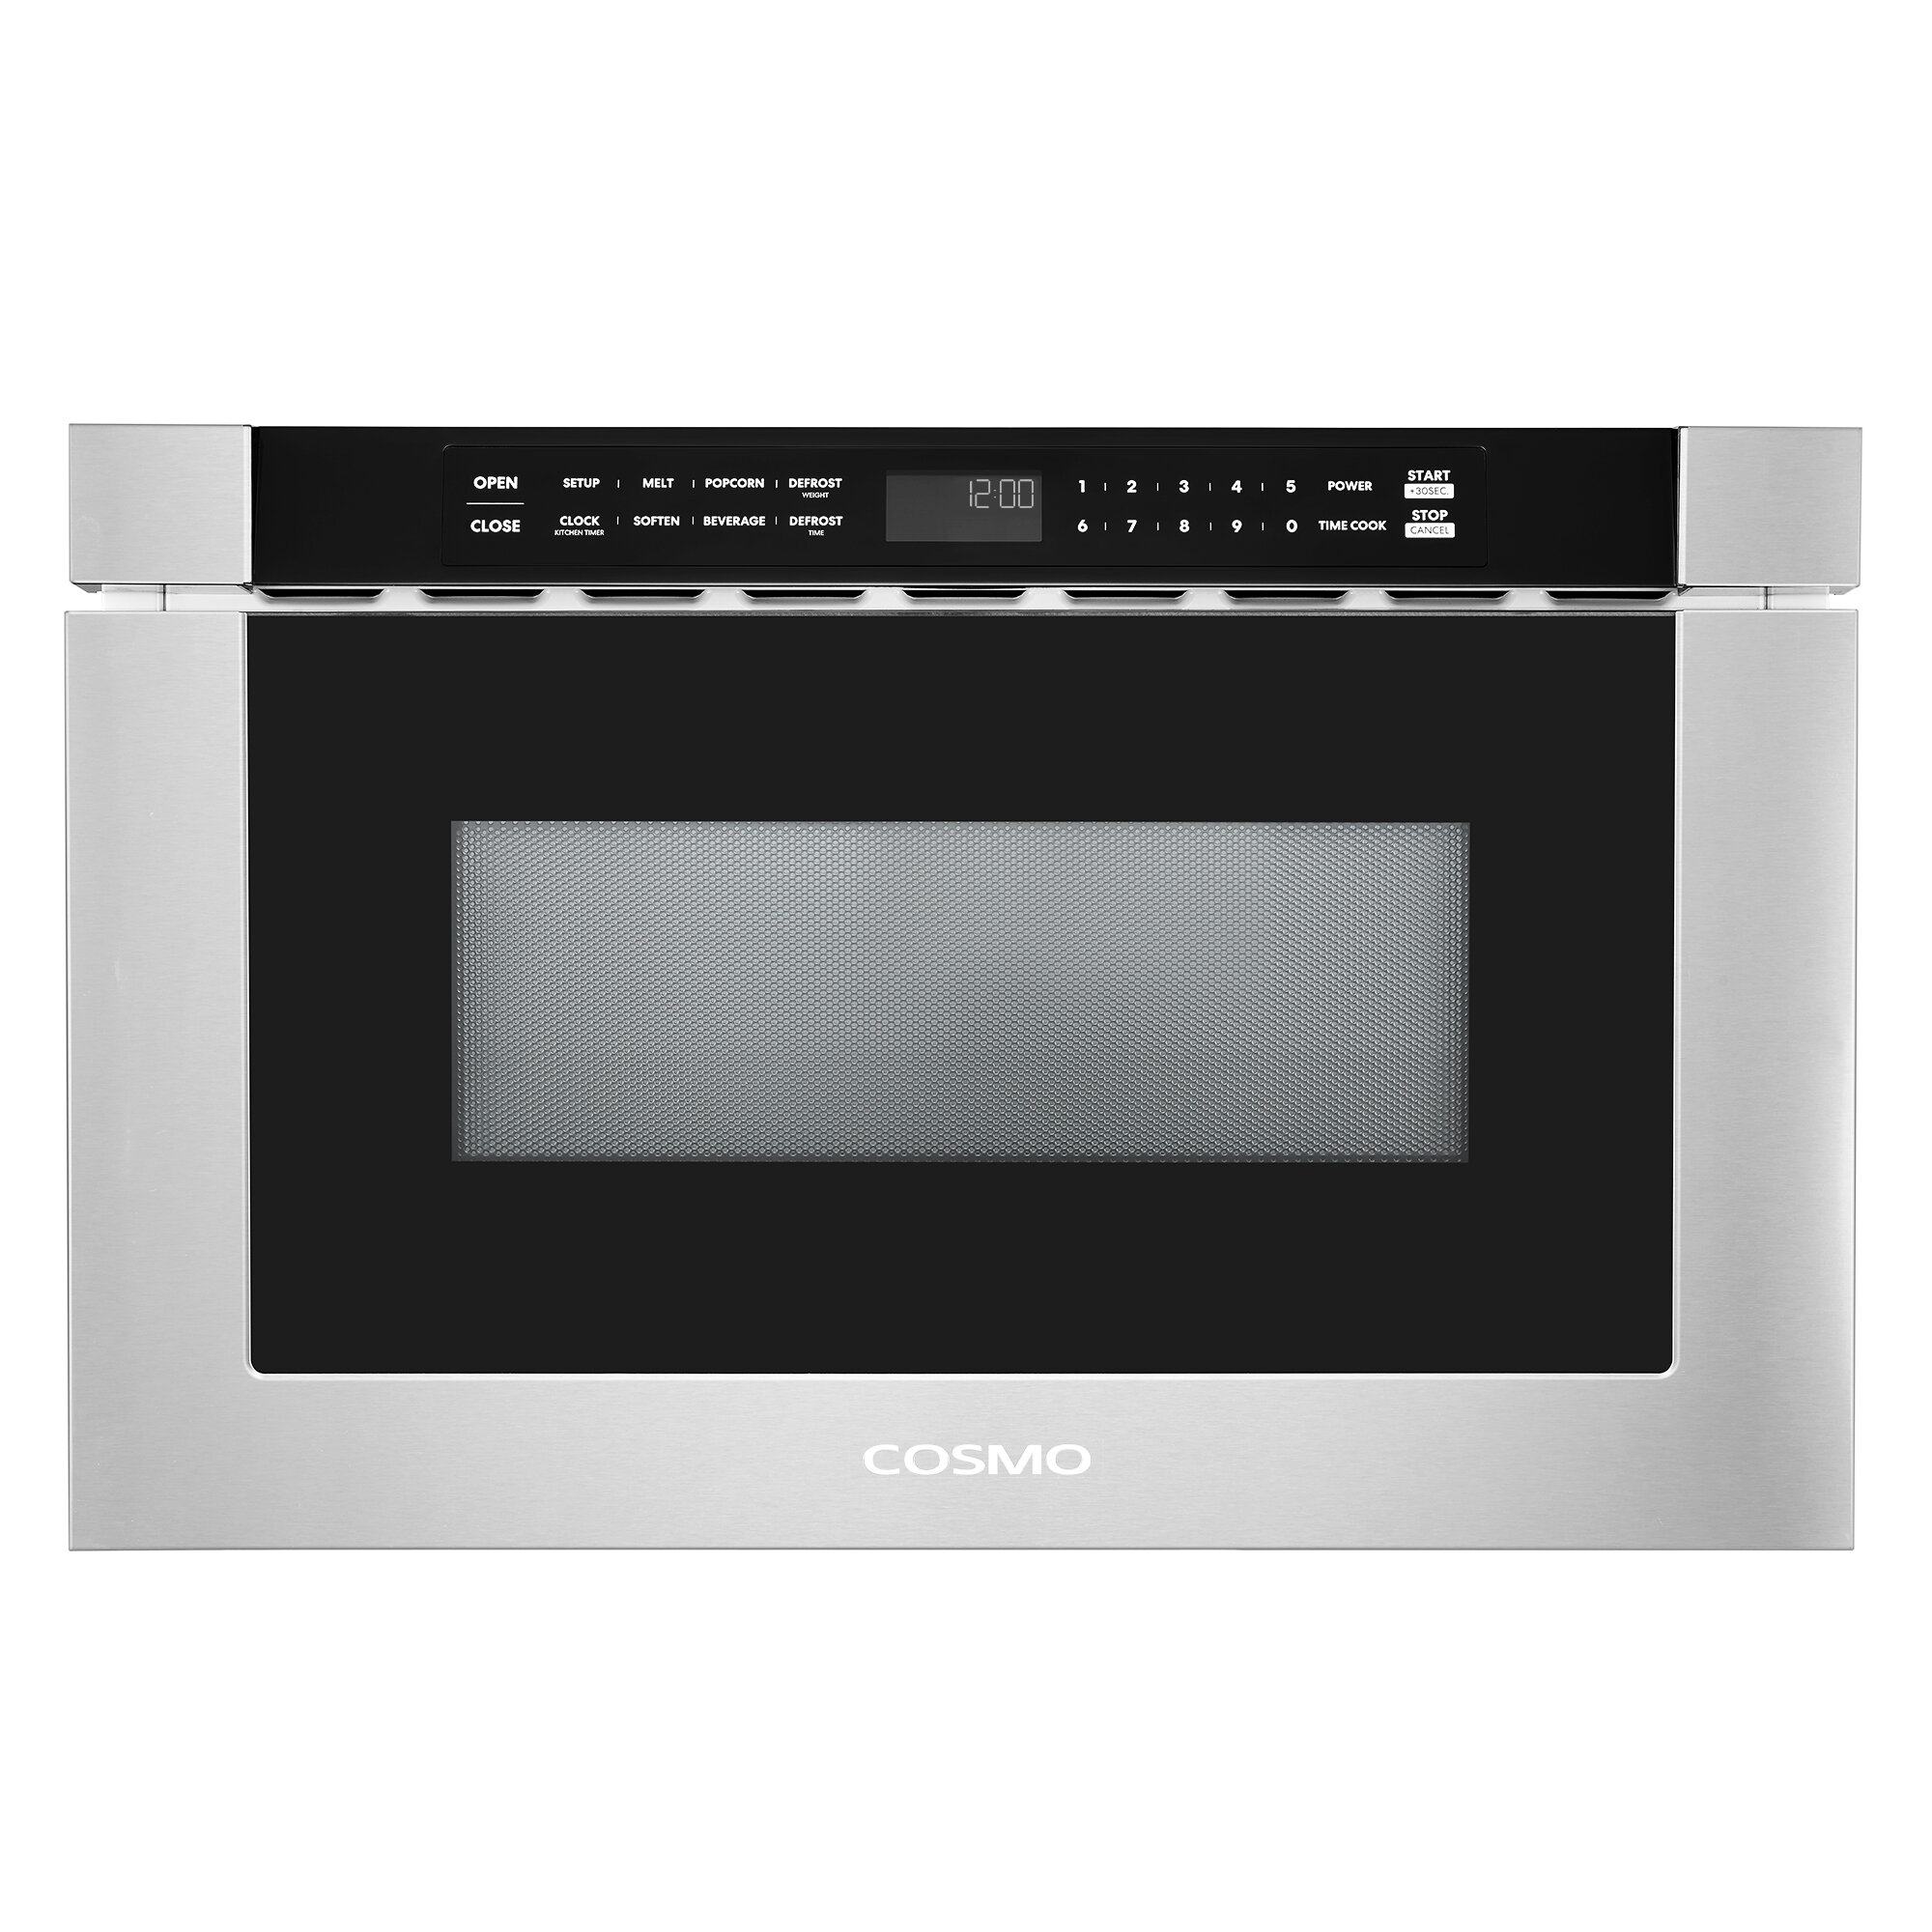 BUILT-IN 0.7 Cu. Ft. Deluxe Microwave Oven w/ Trim Kit - Stainless Steel